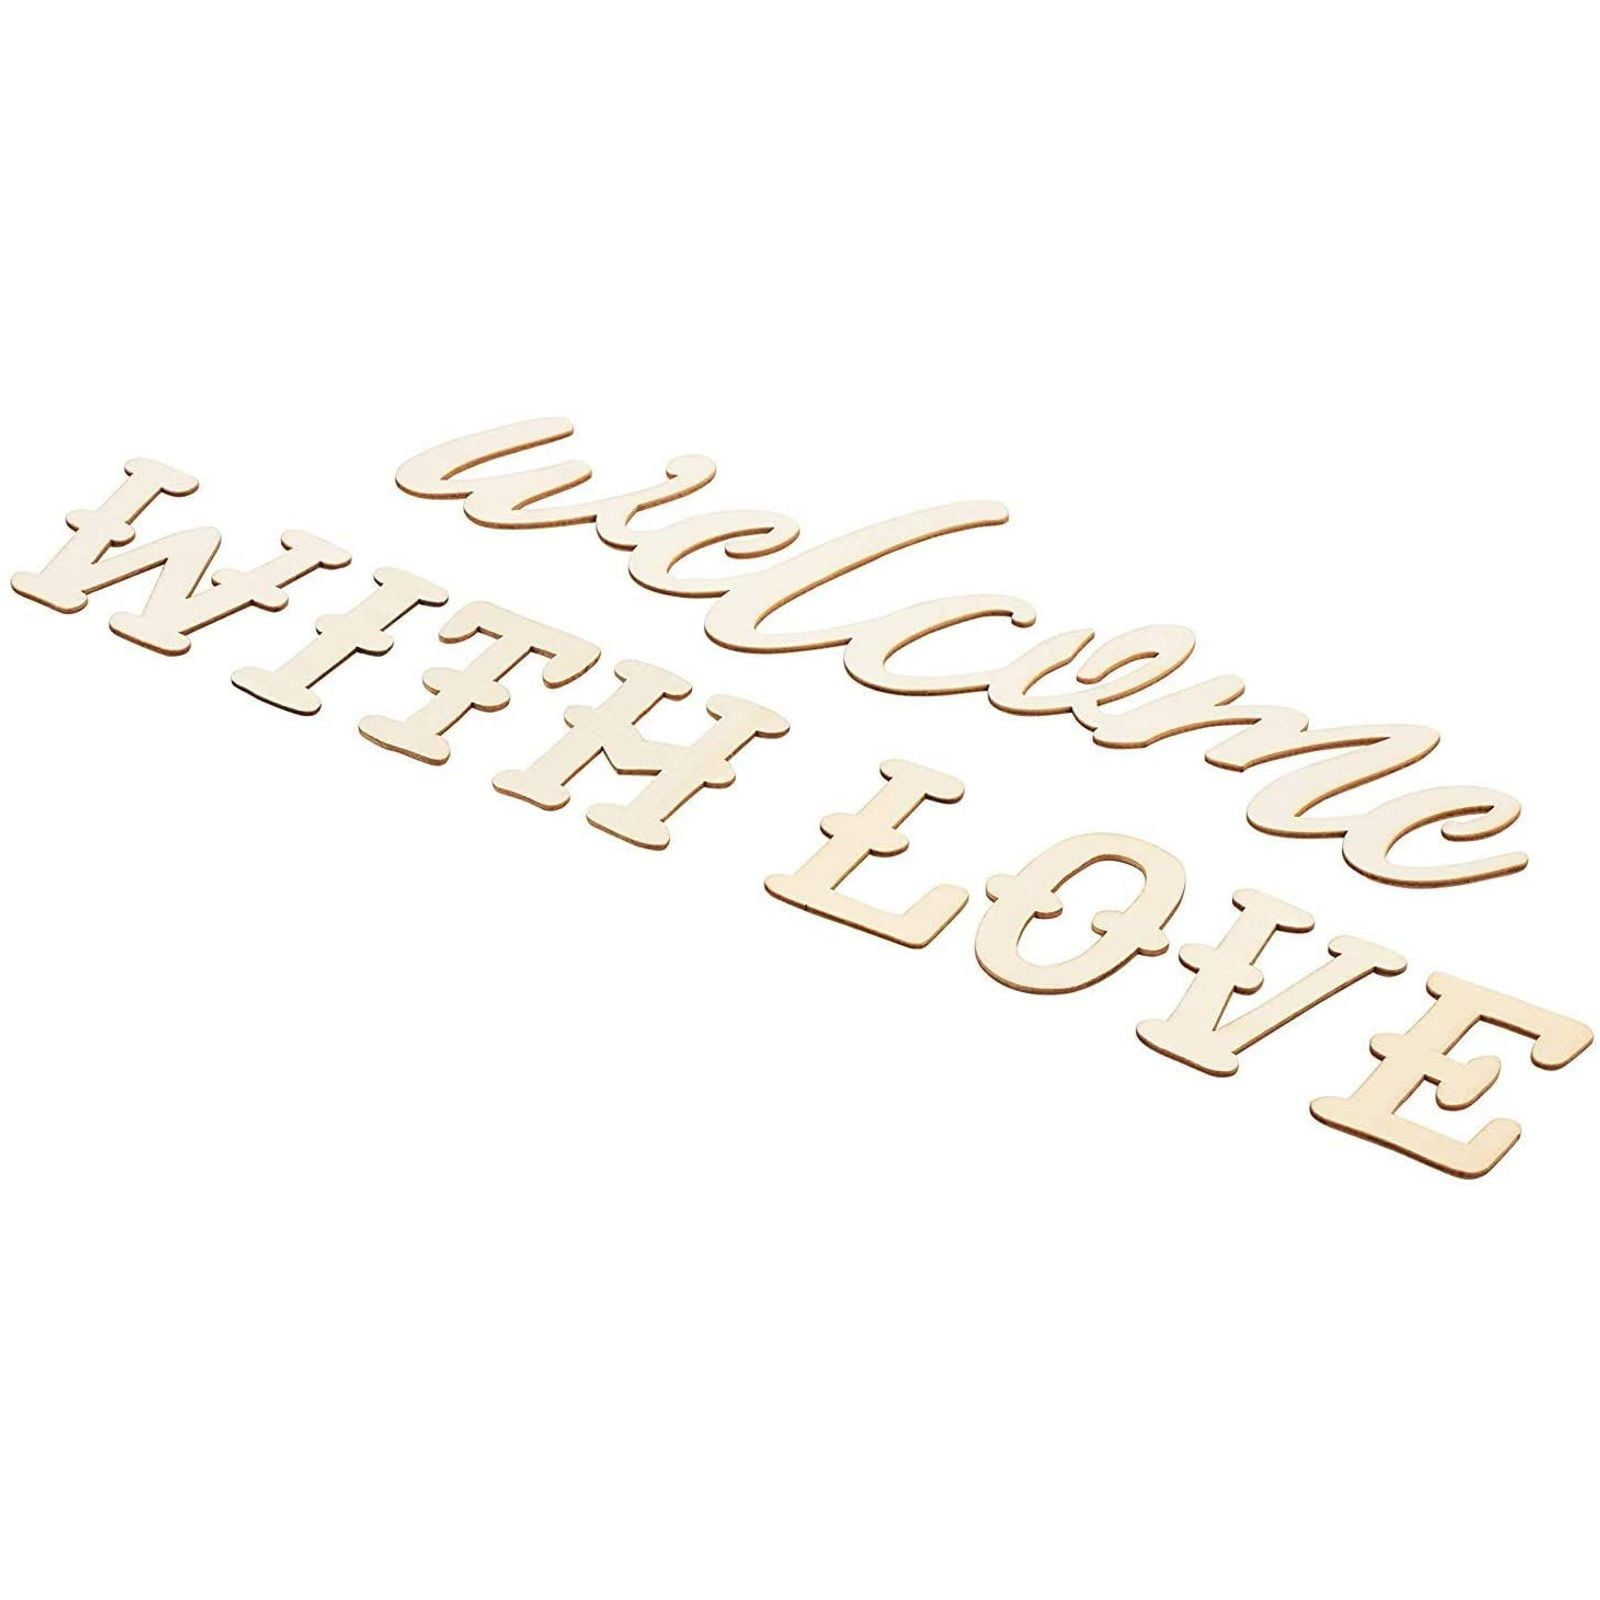 Unfinished Home Decor Wedding Decor Word Cutout "Together" Cutout 